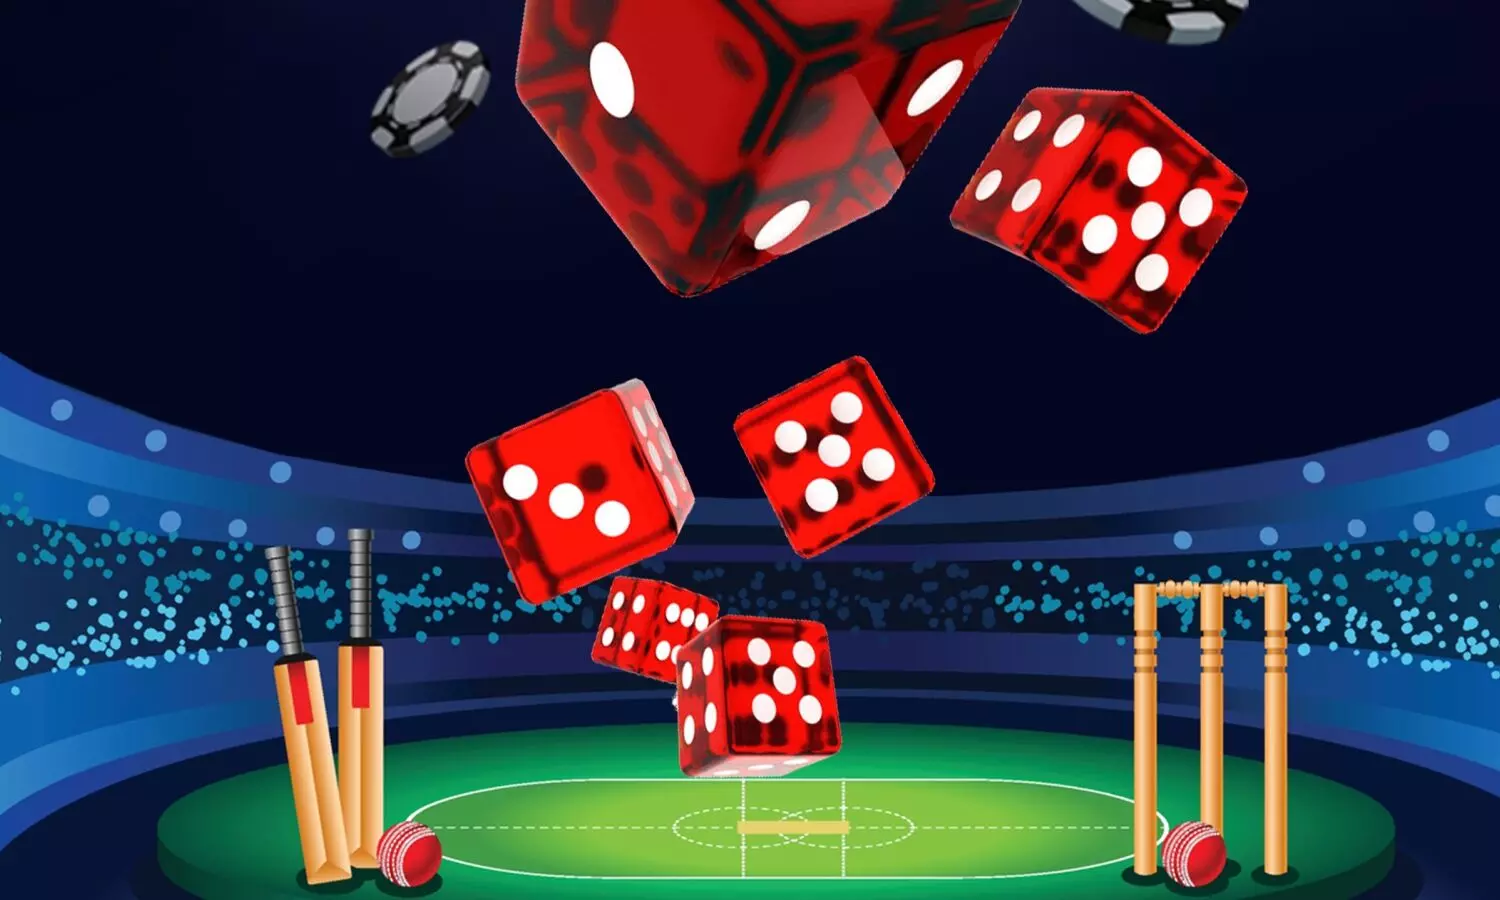 Fantasy Sports - Game Vs. Gambling from Thai Law Perspective